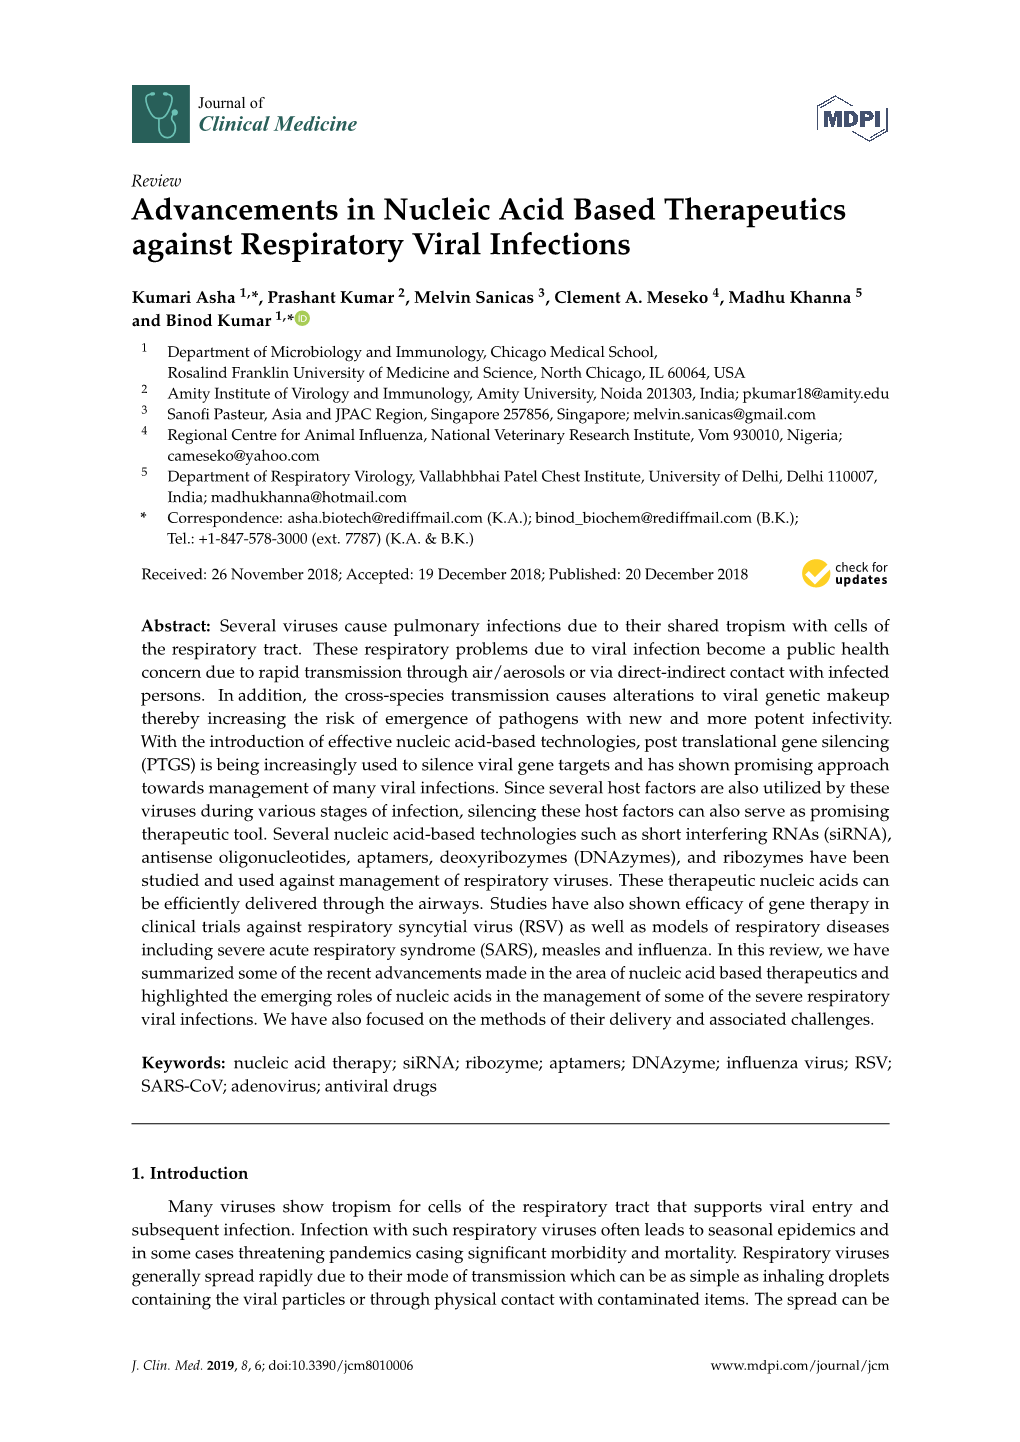 Advancements in Nucleic Acid Based Therapeutics Against Respiratory Viral Infections